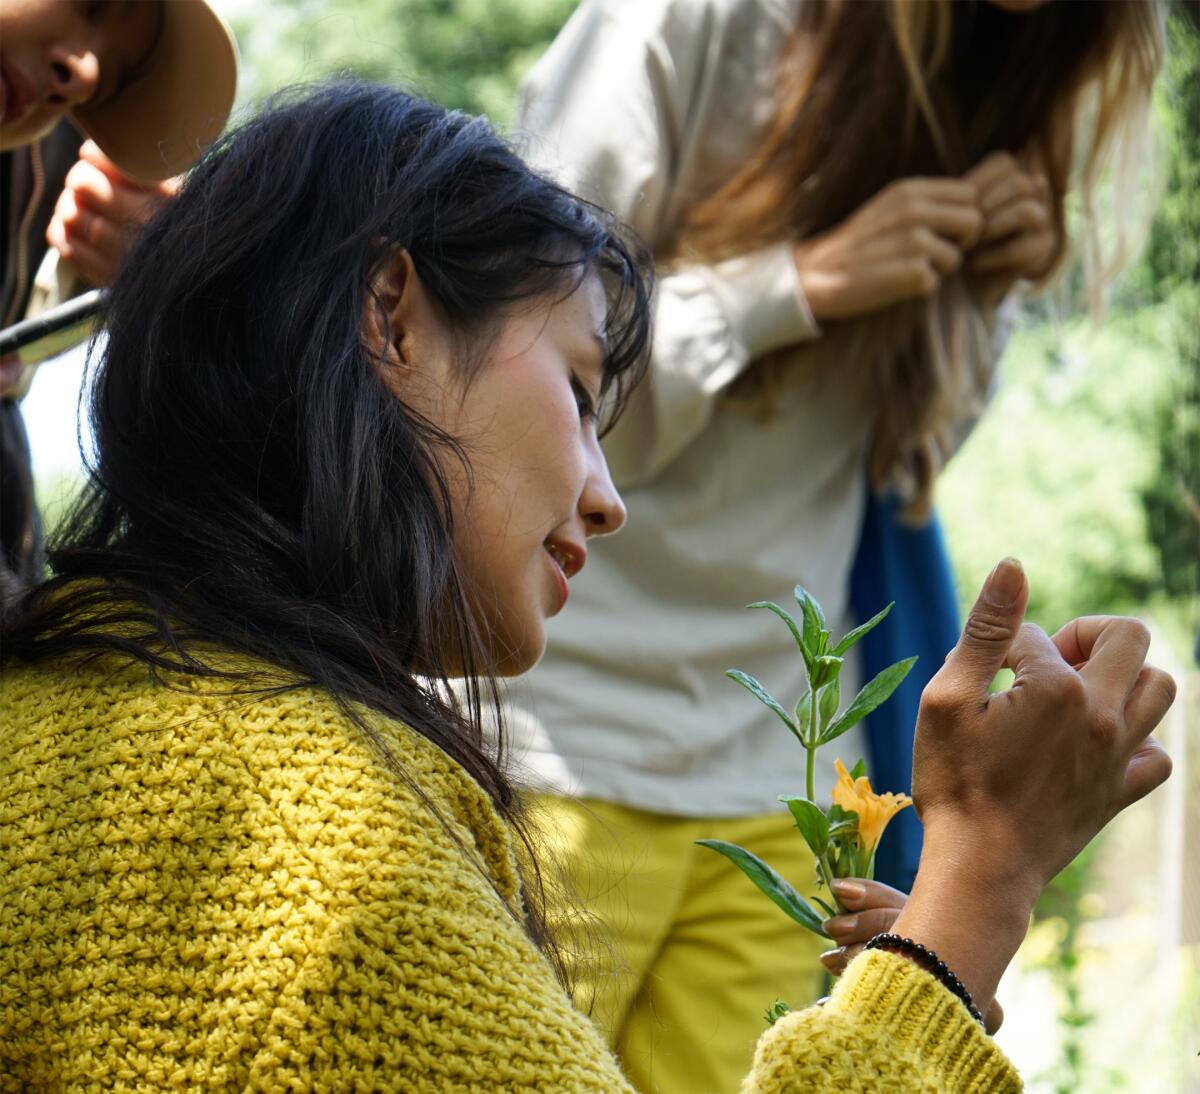 A person holds and points at a plant with a yellow bloom. Folks in the background observe.